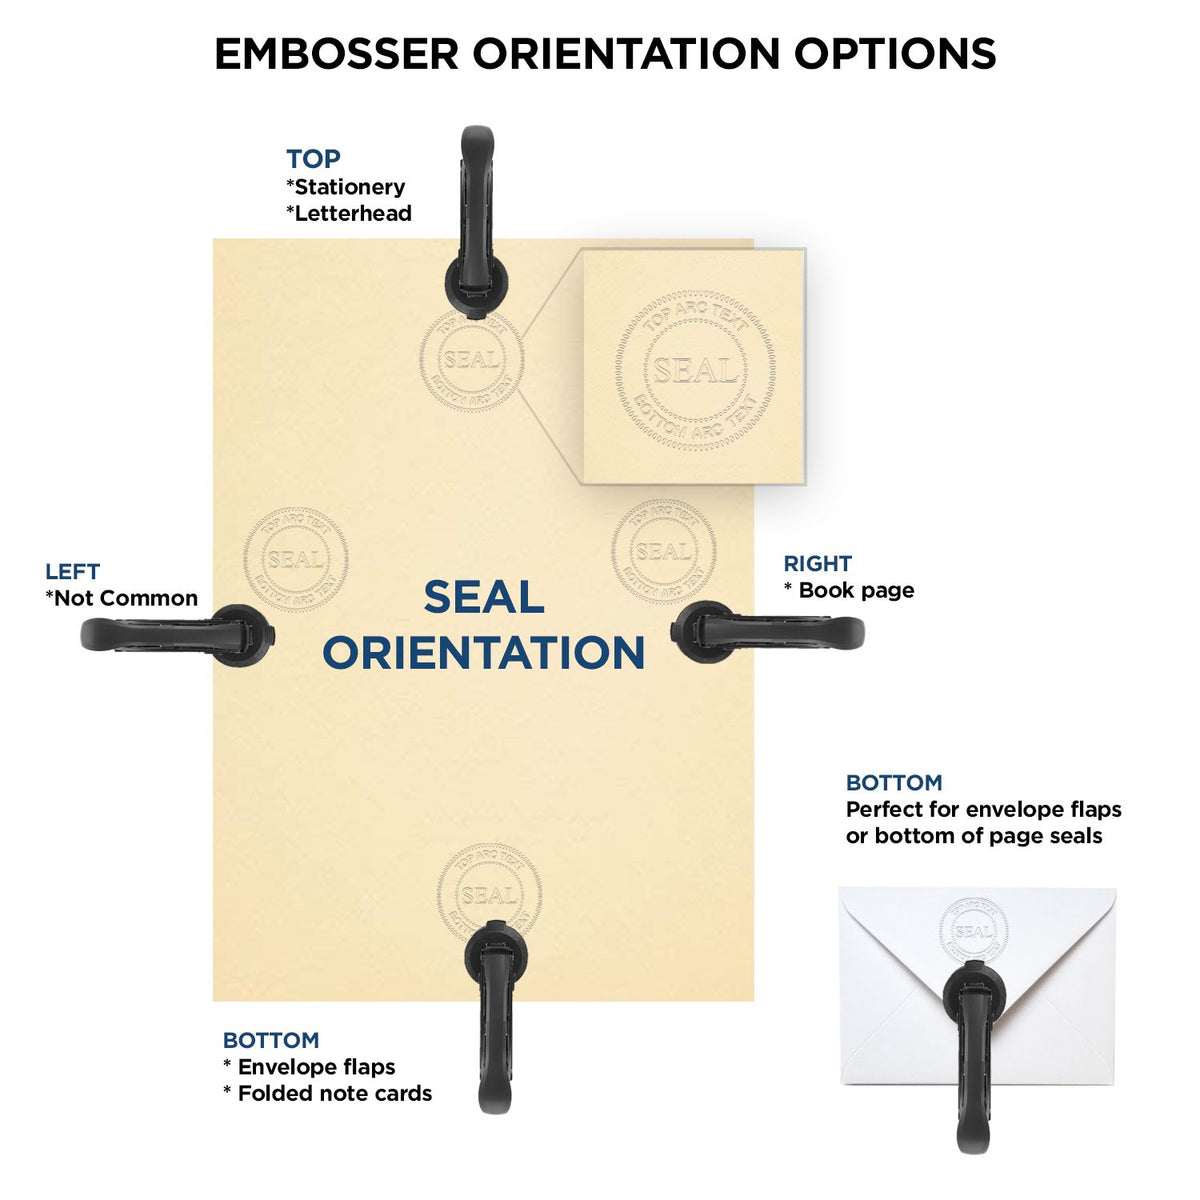 An infographic for the Heavy Duty Cast Iron Minnesota Architect Embosser showing embosser orientation, this is showing examples of a top, bottom, right and left insert.